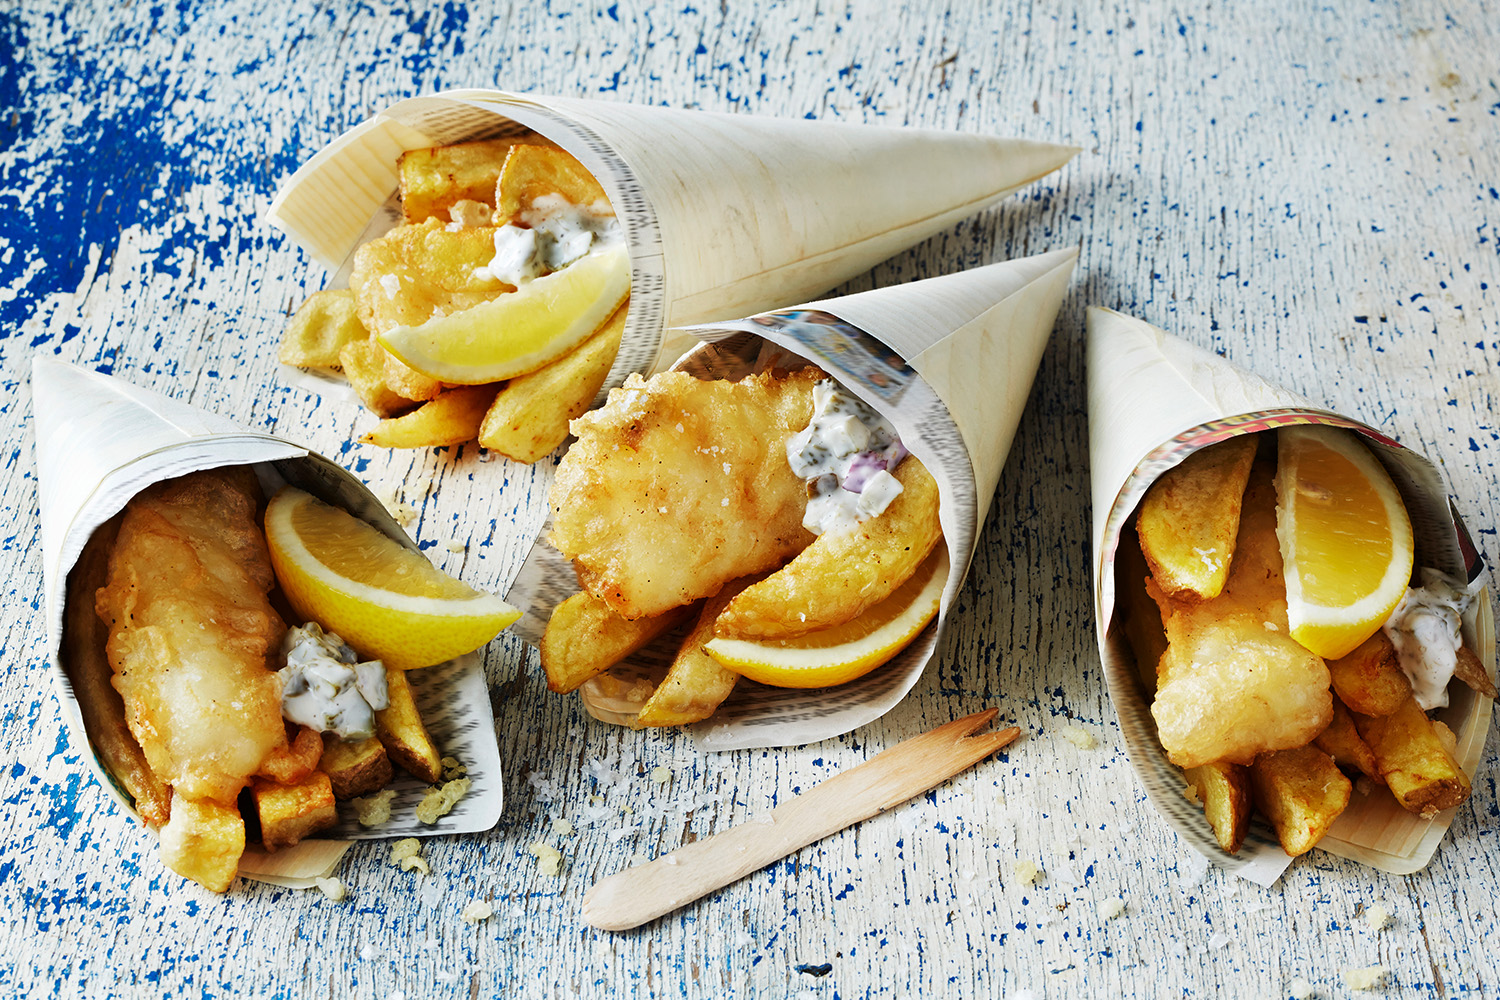 Where to buy the fish and chips in Australia | Better and Gardens